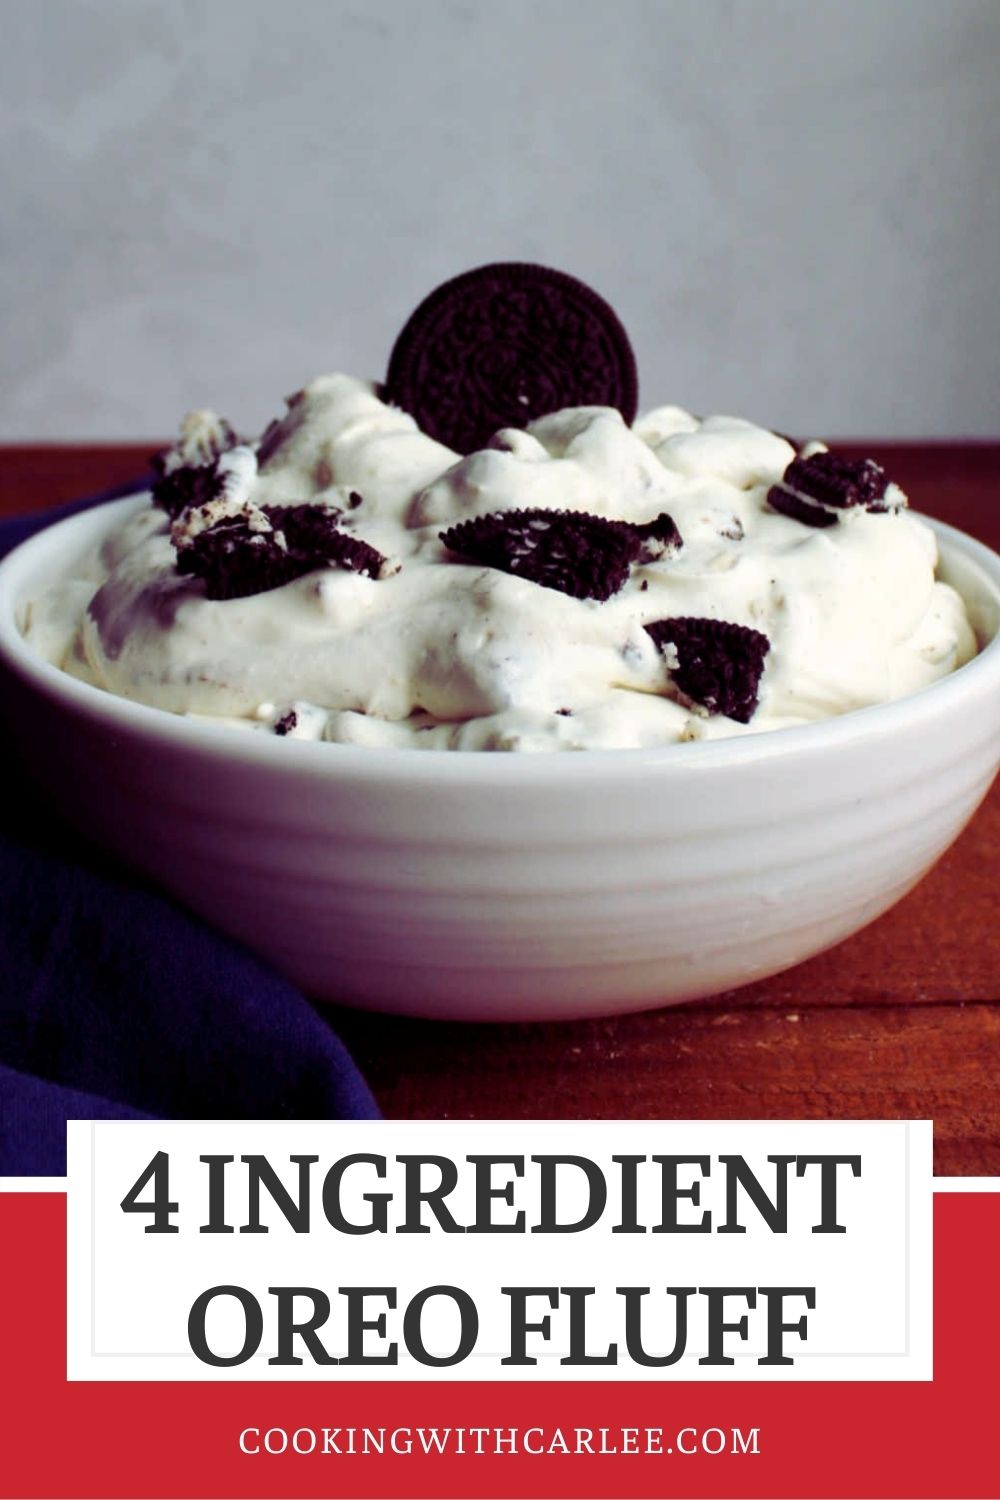 4 ingredient Oreo fluff is a super simple and fun dessert. Serve it as a dip for strawberries, pretzels or cookies or enjoy it on it's own as a fluffy dessert salad.